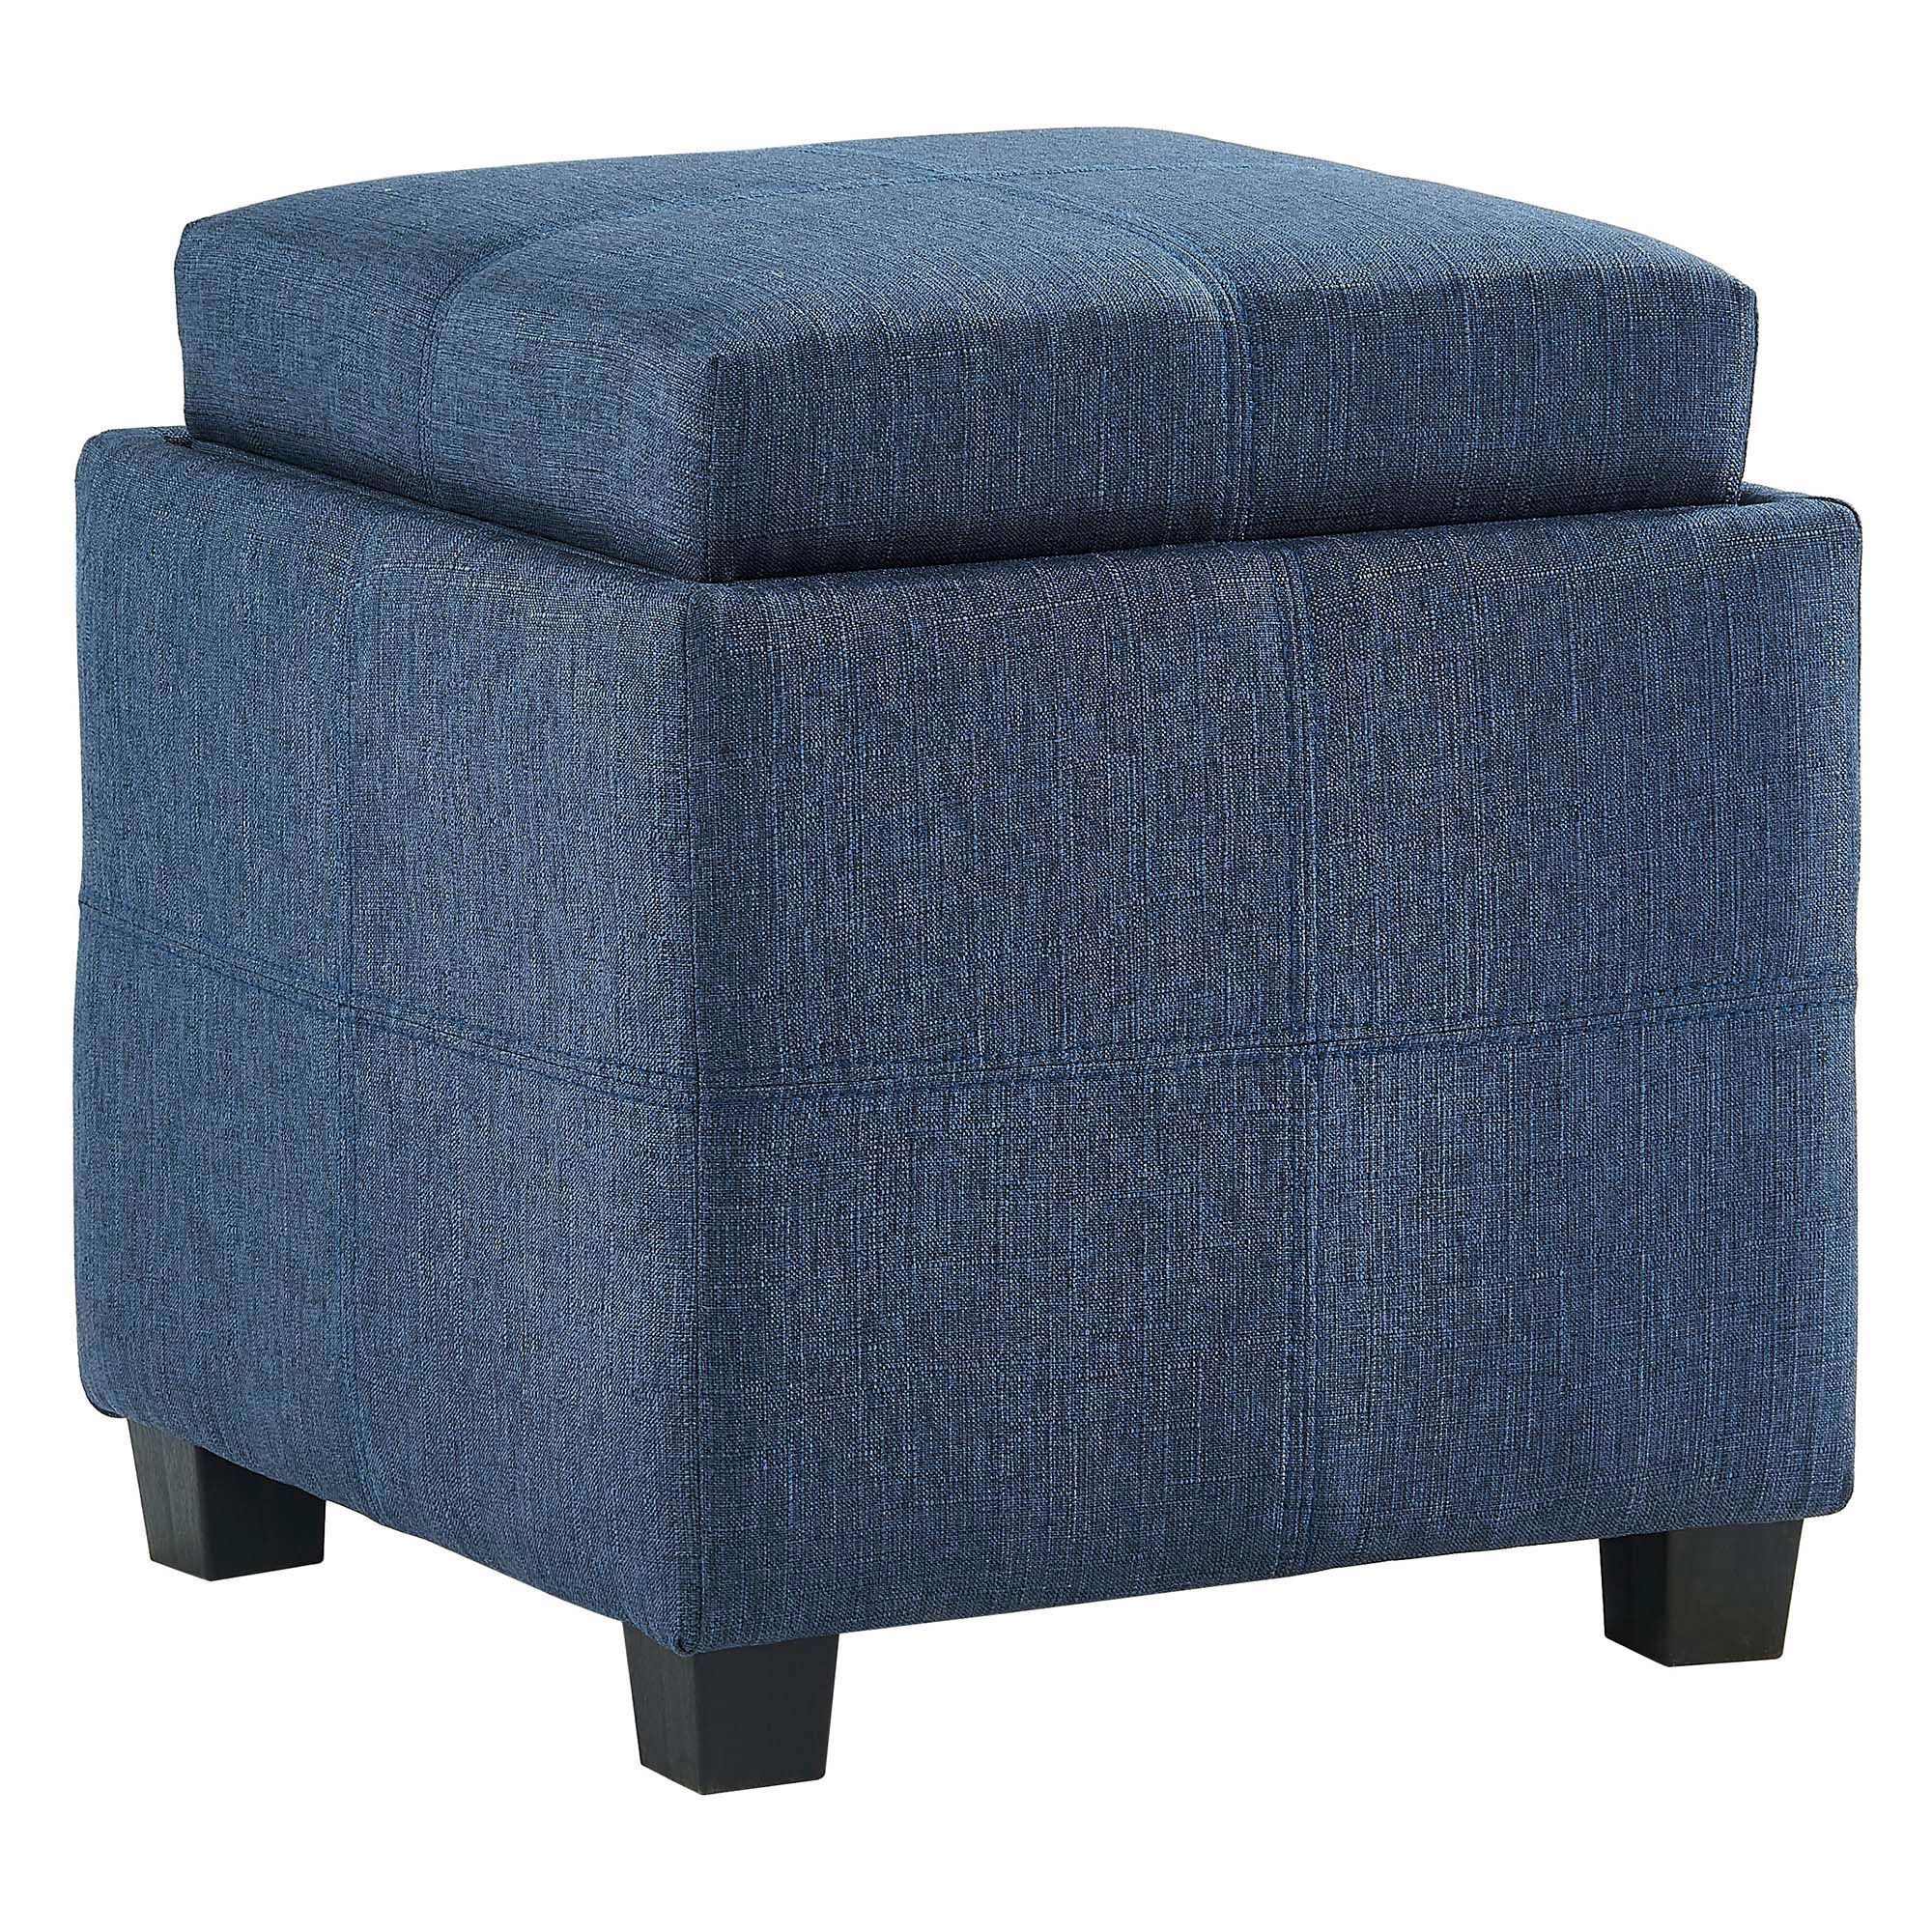 19" Blue And Gray Transitional Square Storage Ottoman With Reversible Pertaining To Famous White Wool Square Pouf Ottomans (View 9 of 10)